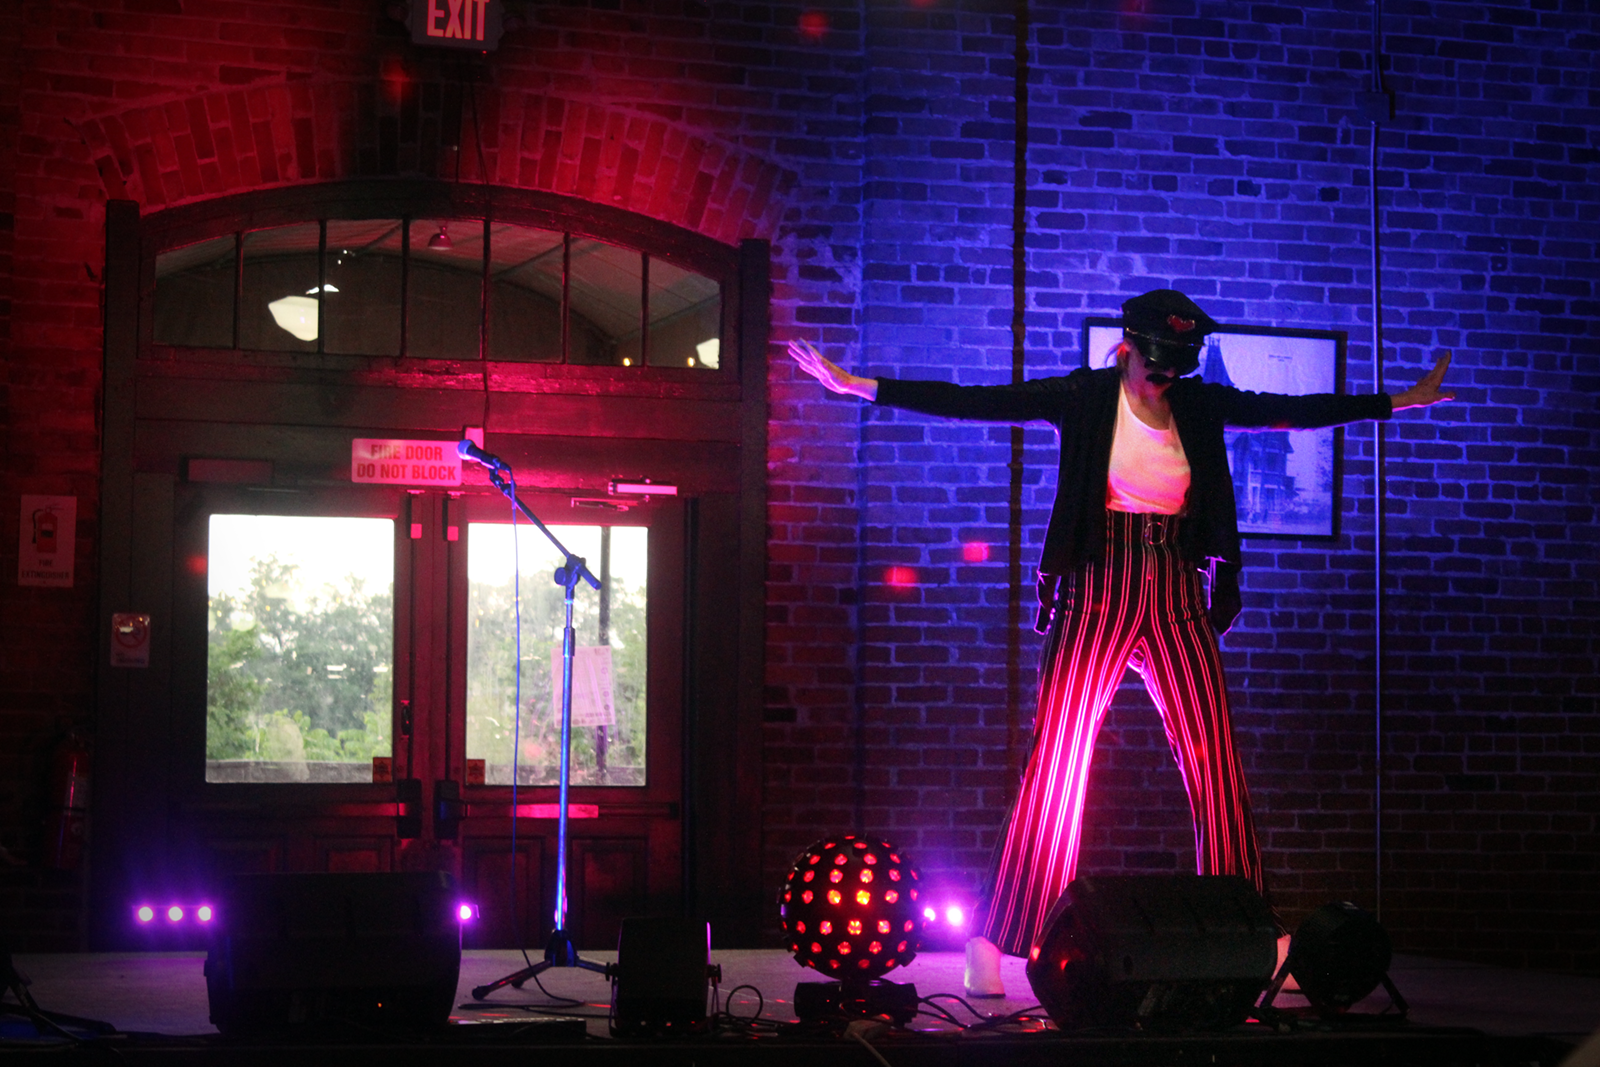 The Freighthouse stage combines comedy and burlesque with a rousing performance of Queen’s "Don’t Stop Me Now," with a performer costumed as Freddie Mercury.